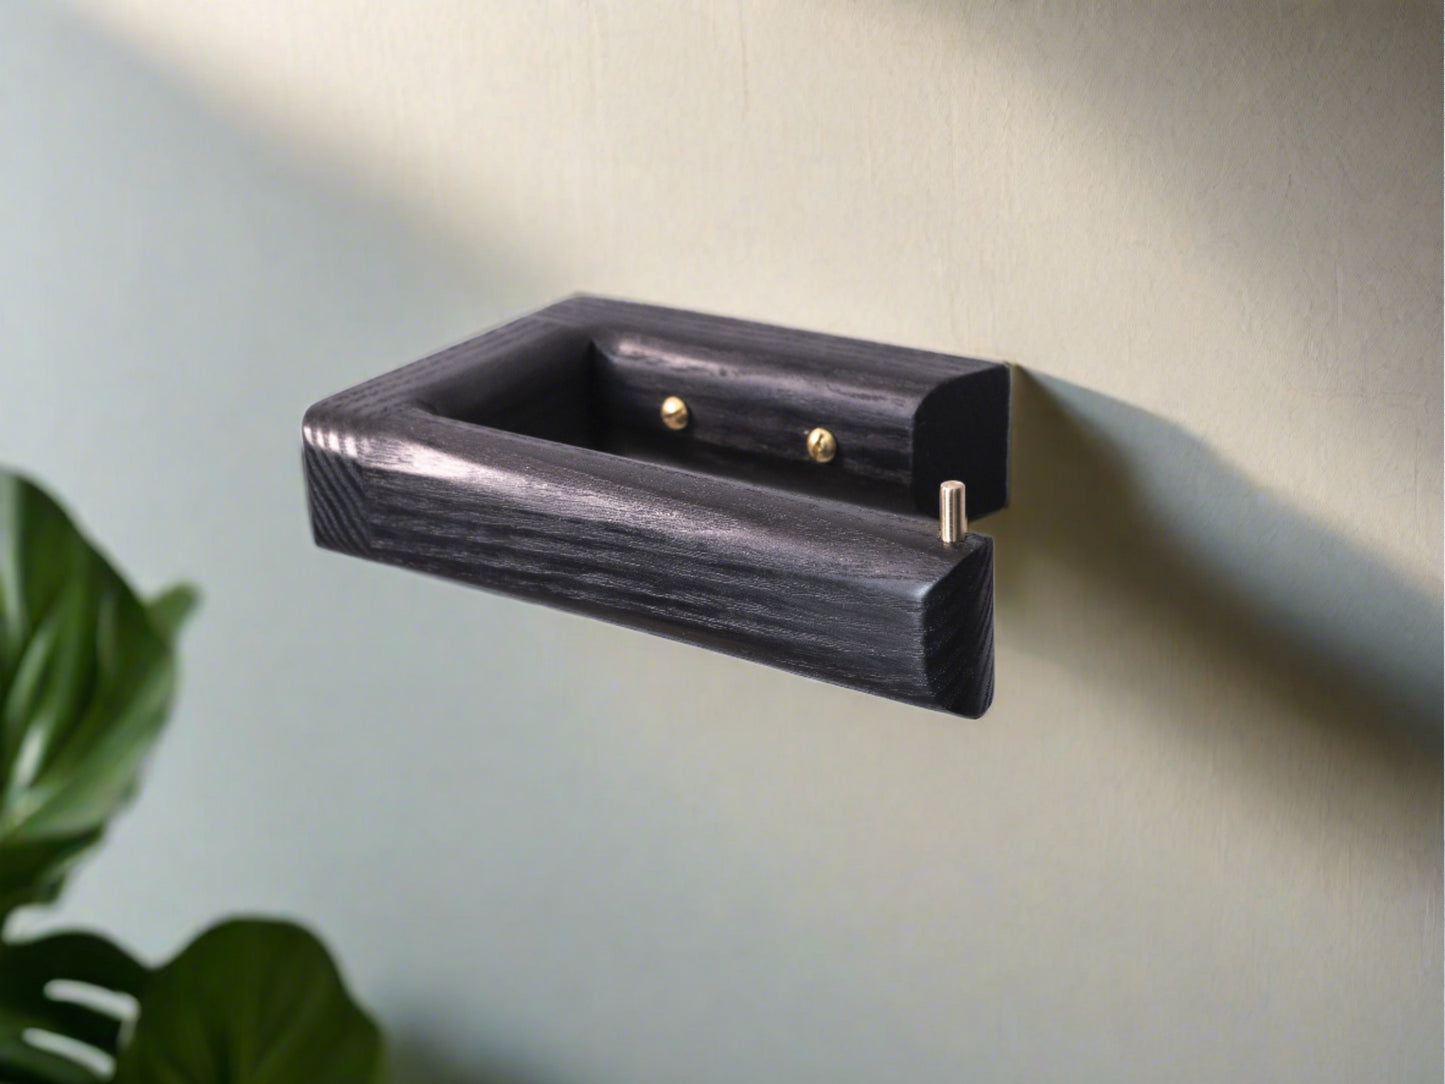 best black toilet roll holder for one paper roll with brass fittings made by noir.design